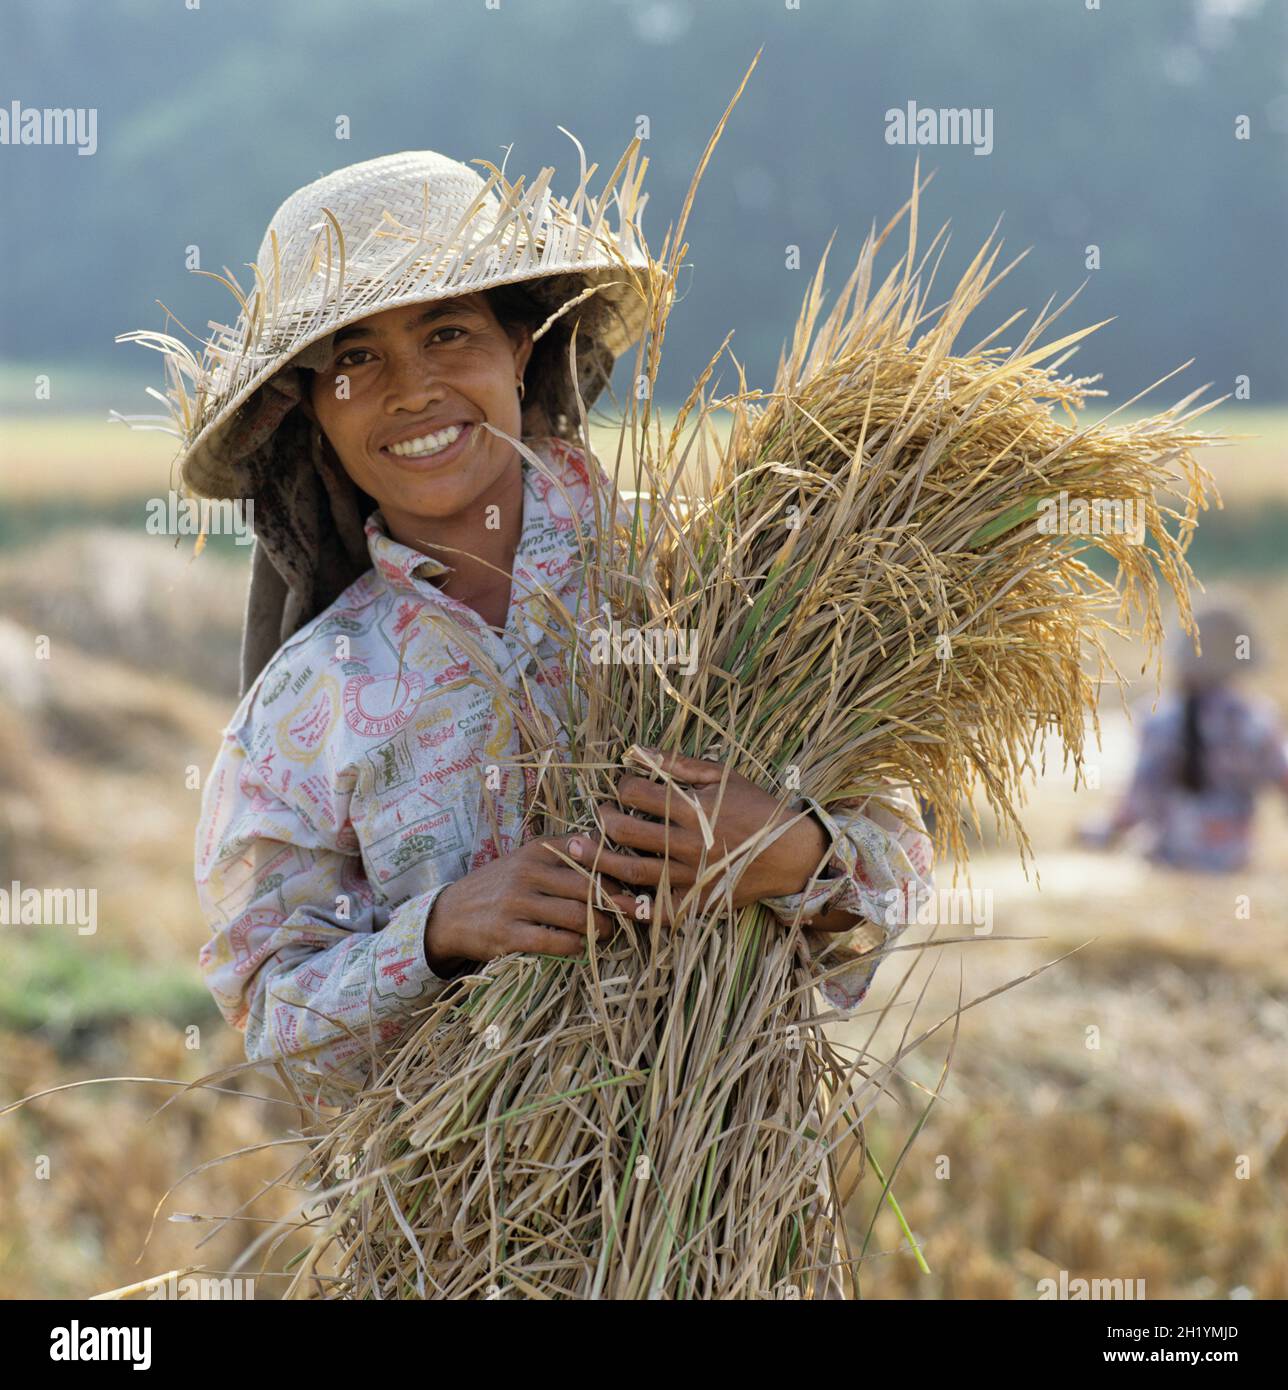 Young Bali woman working in the fields and posing in straw hat, Ubud, Bali, Indonesia, Southeast Asia Stock Photo